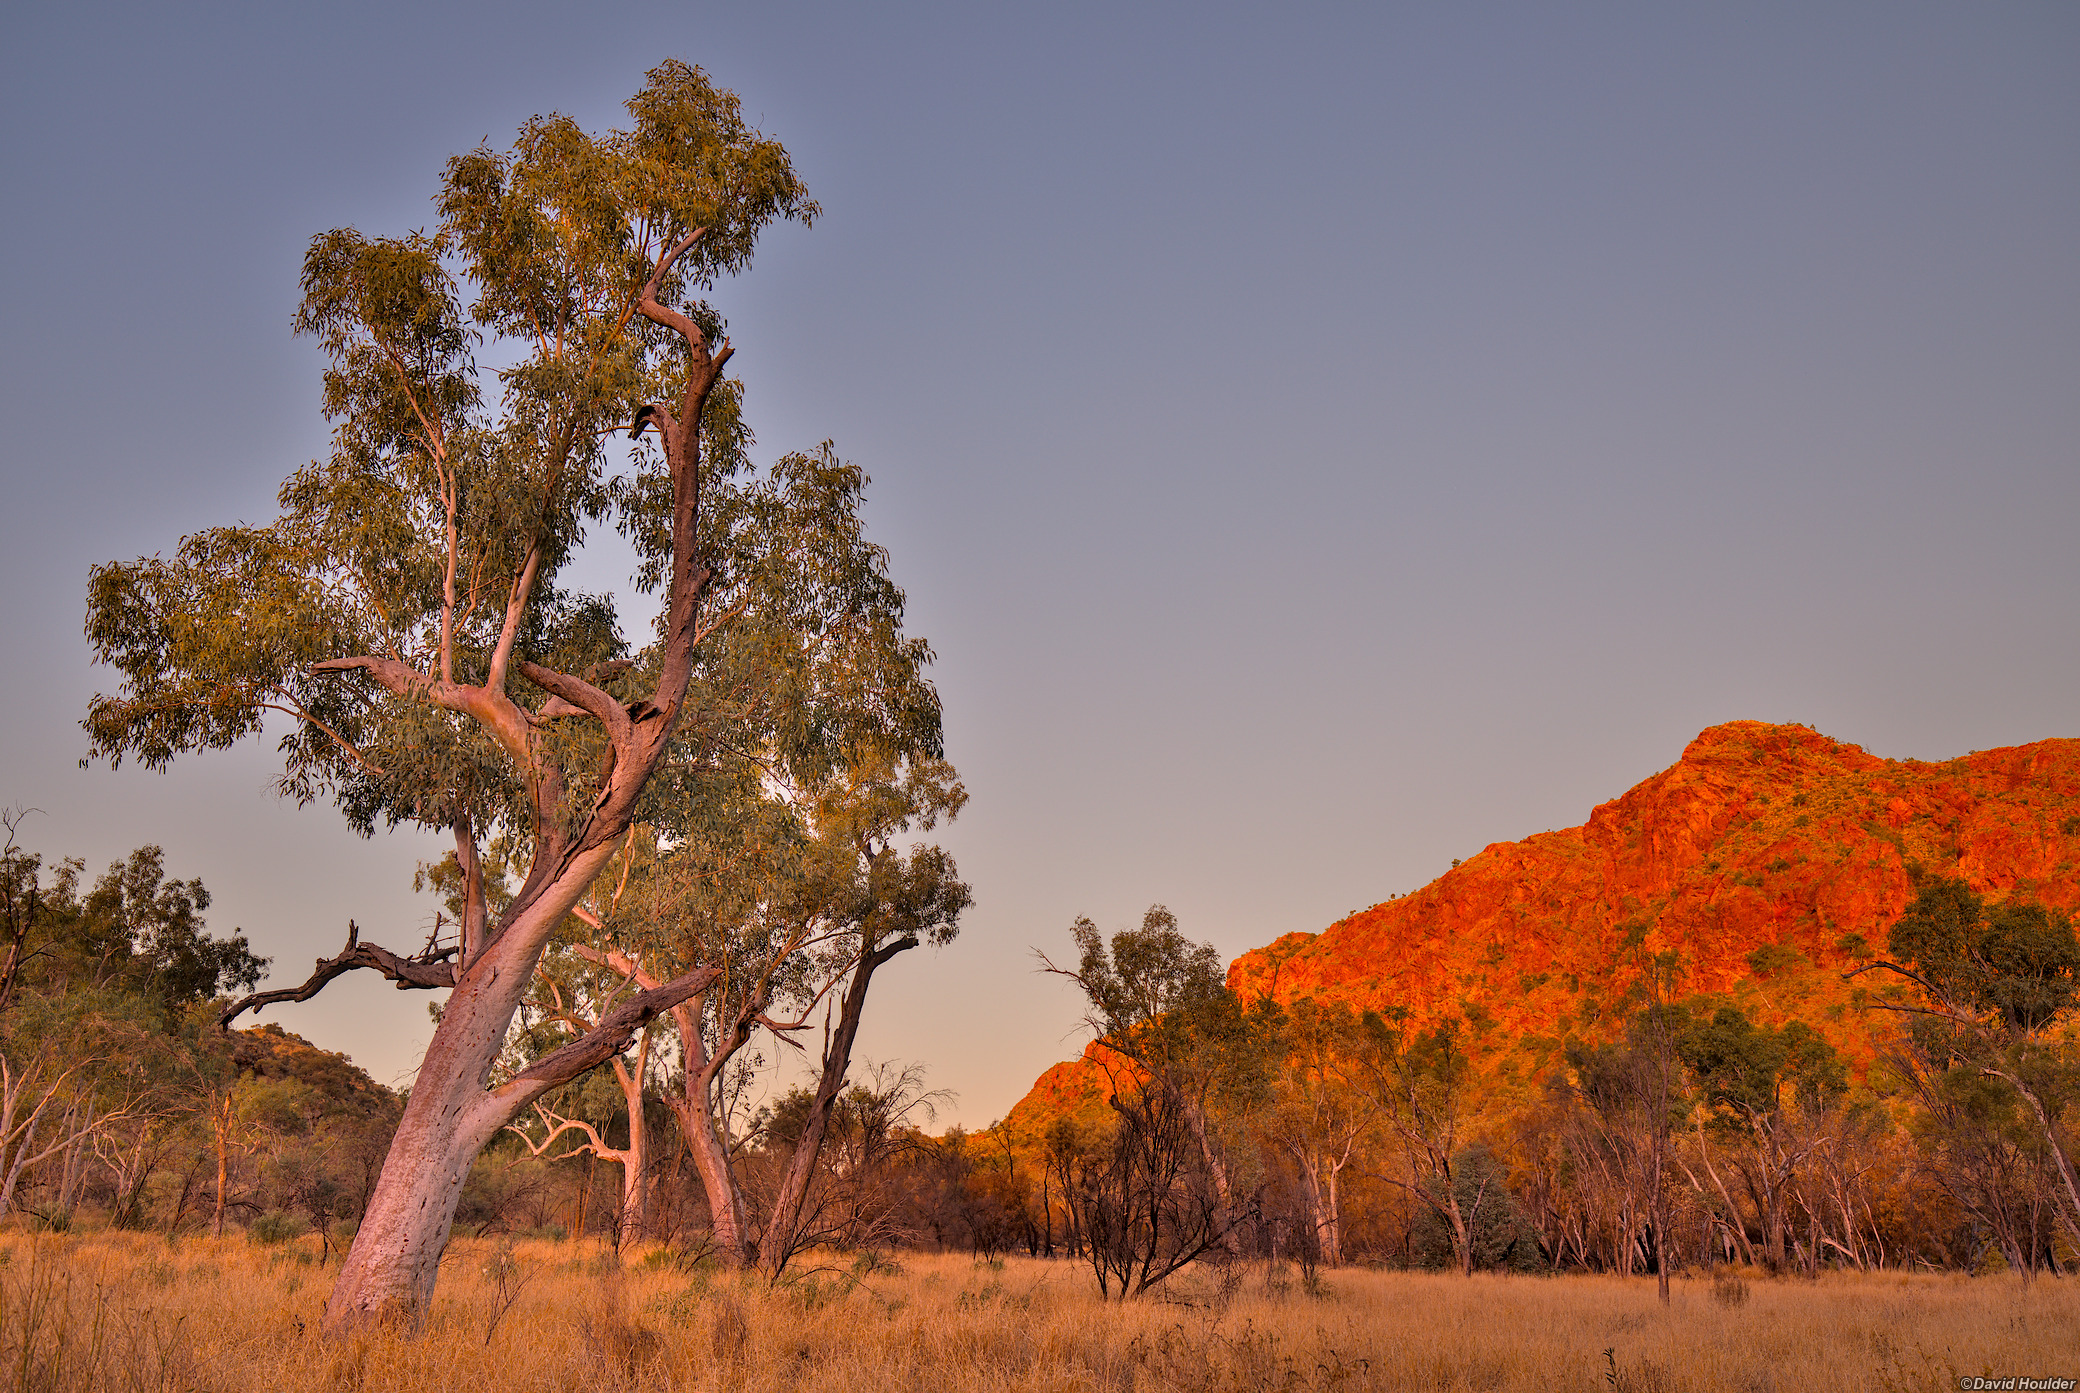 A large eucalyptus tree and grassland with a rocky hill in the background